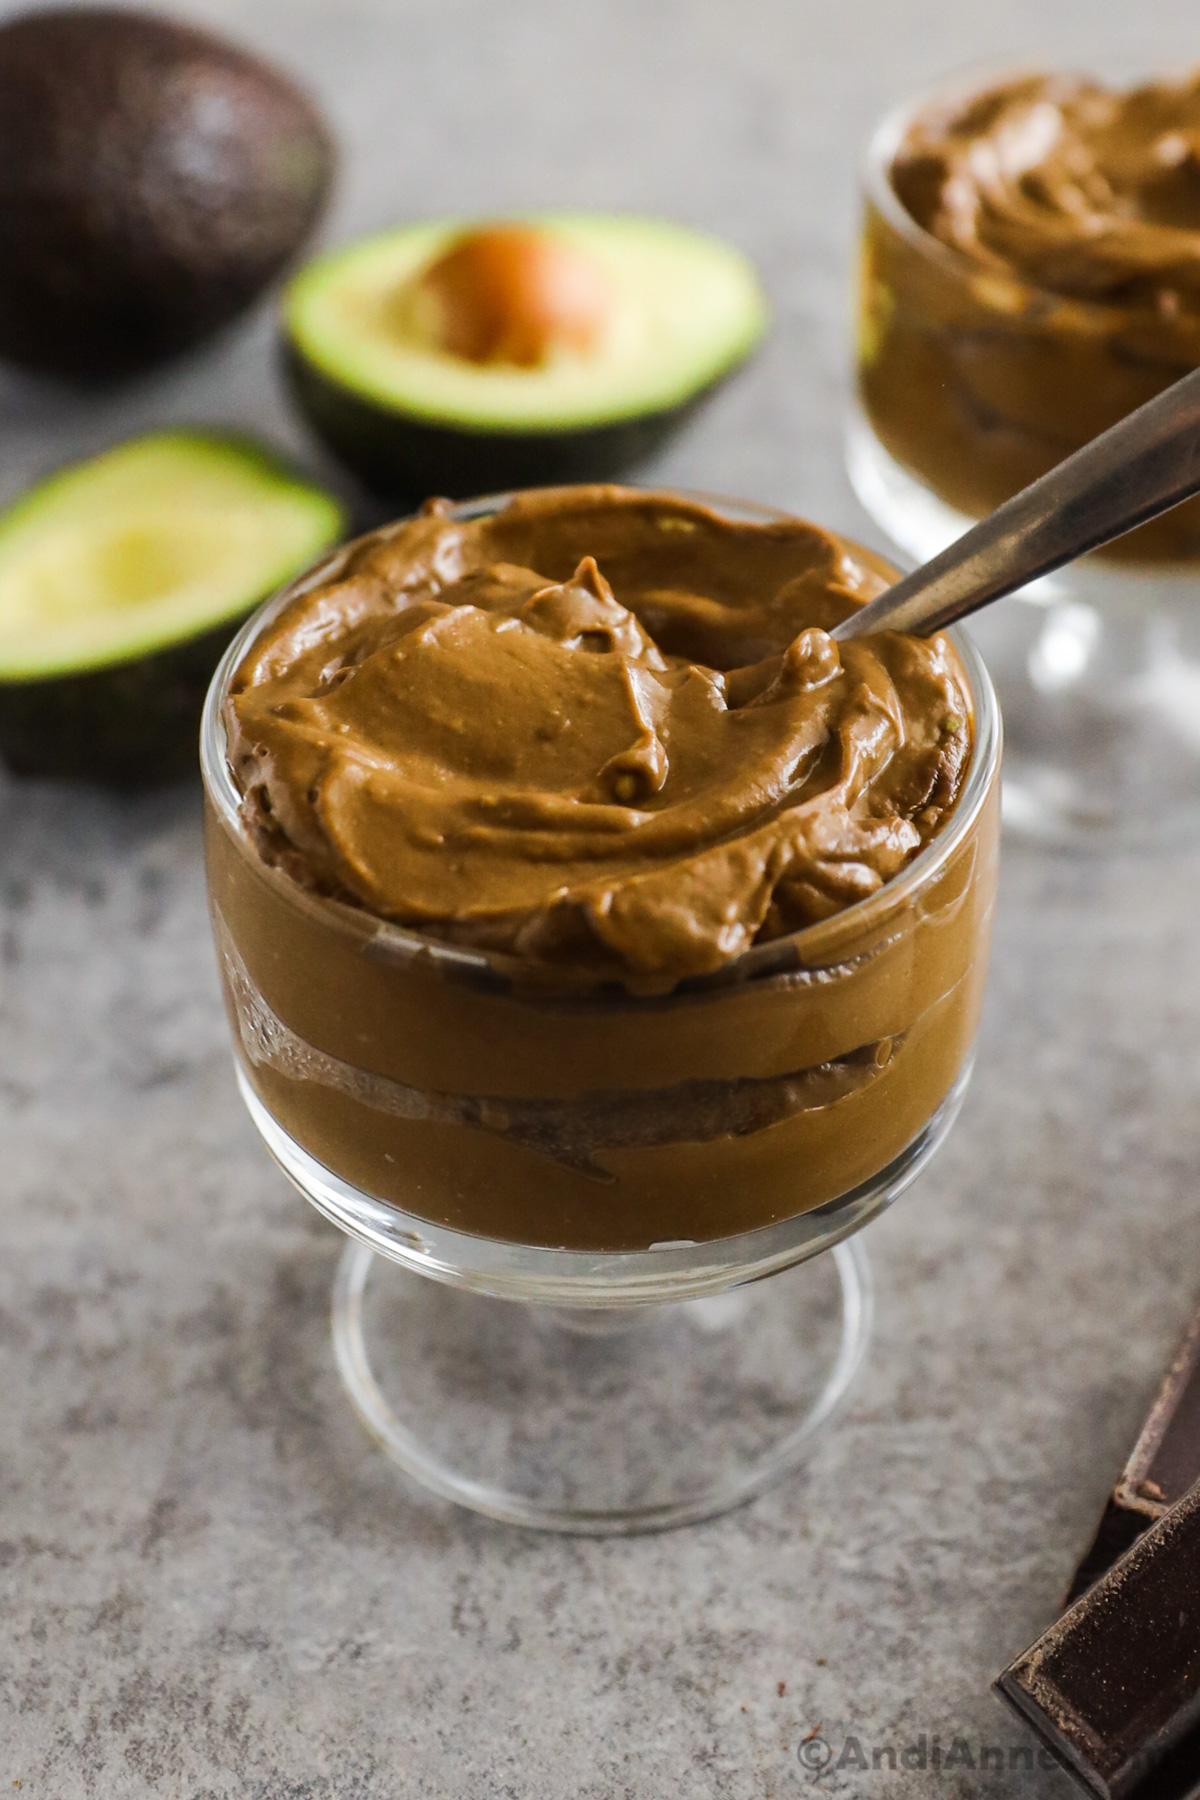 A glass dish with chocolate pudding and sliced avocado in the background.